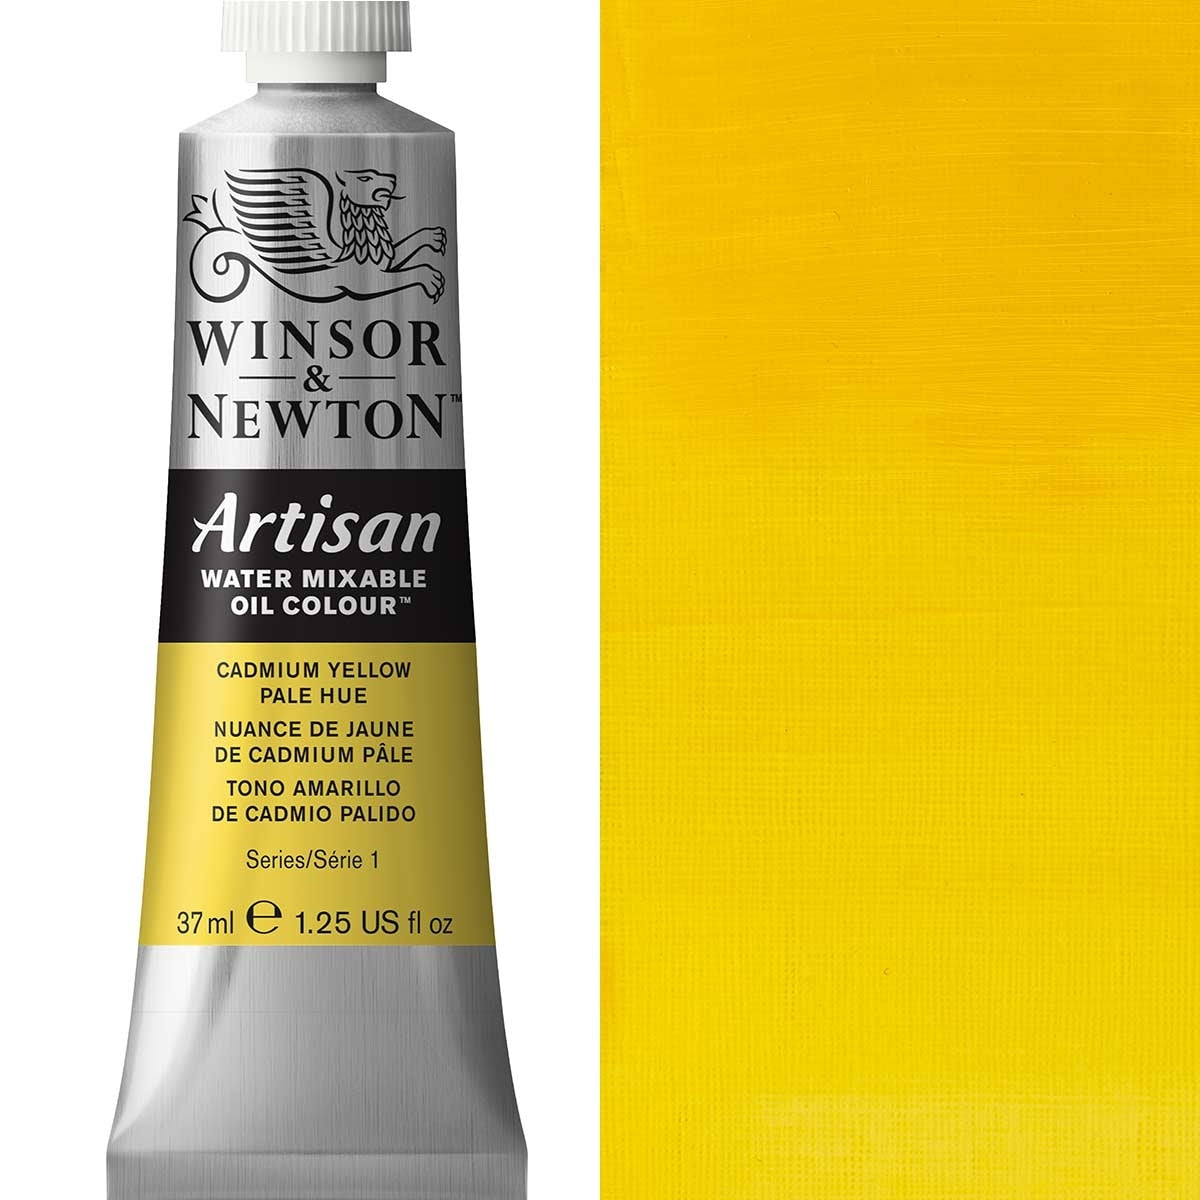 Winsor and Newton - Artisan Oil Colour Watermixable - 37ml - Cadmium Yellow Pale